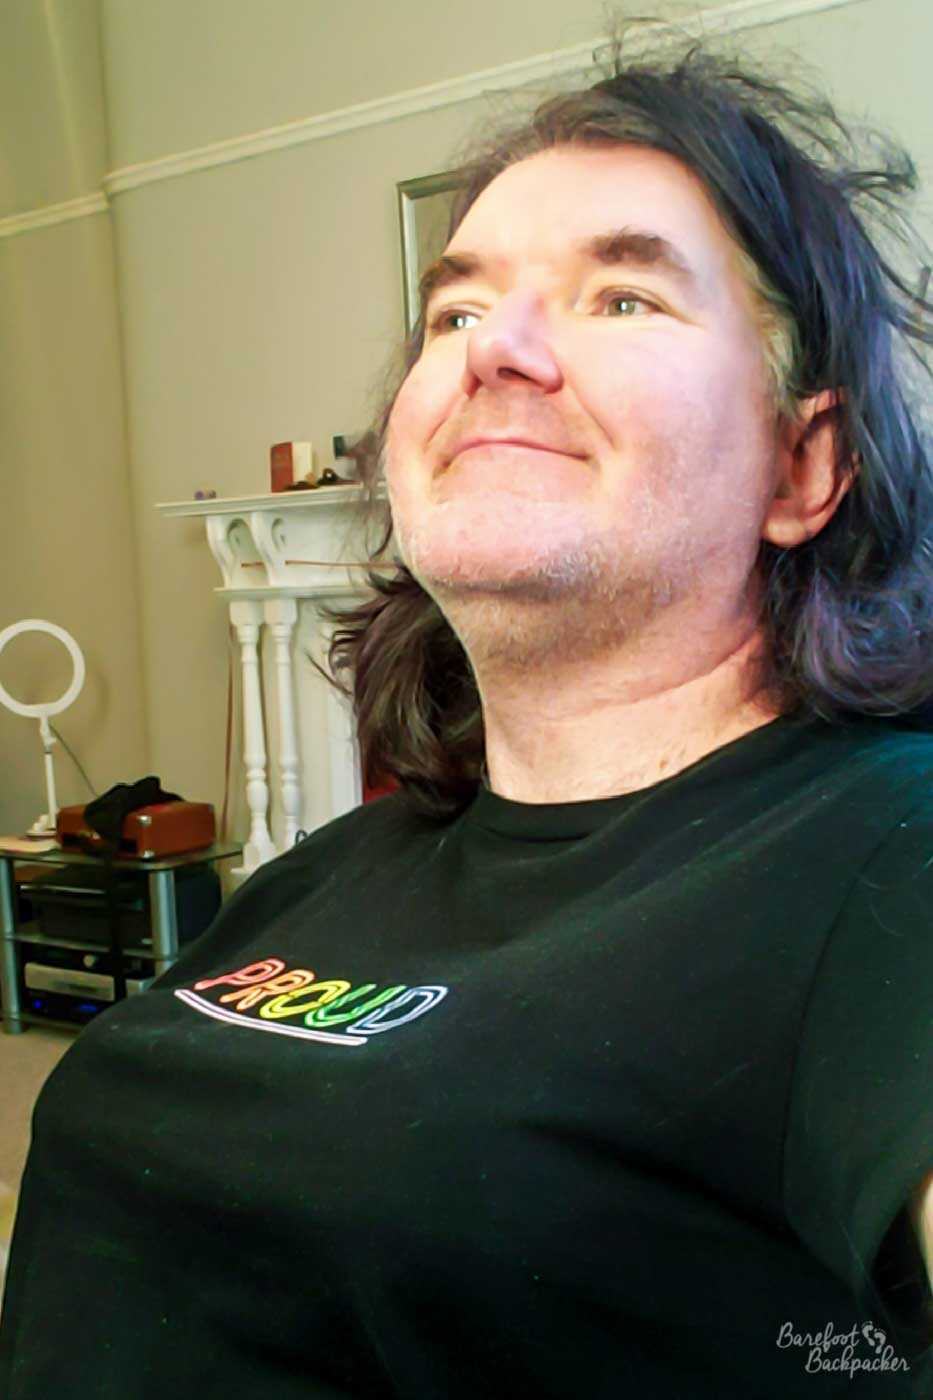 Someone is wearing a black t-shirt with the word 'proud' in rainbow letters on it. They are sat with quite a straight back. Under their t-shirt are what appear to be breasts, although the person in question otherwise presents as a man.